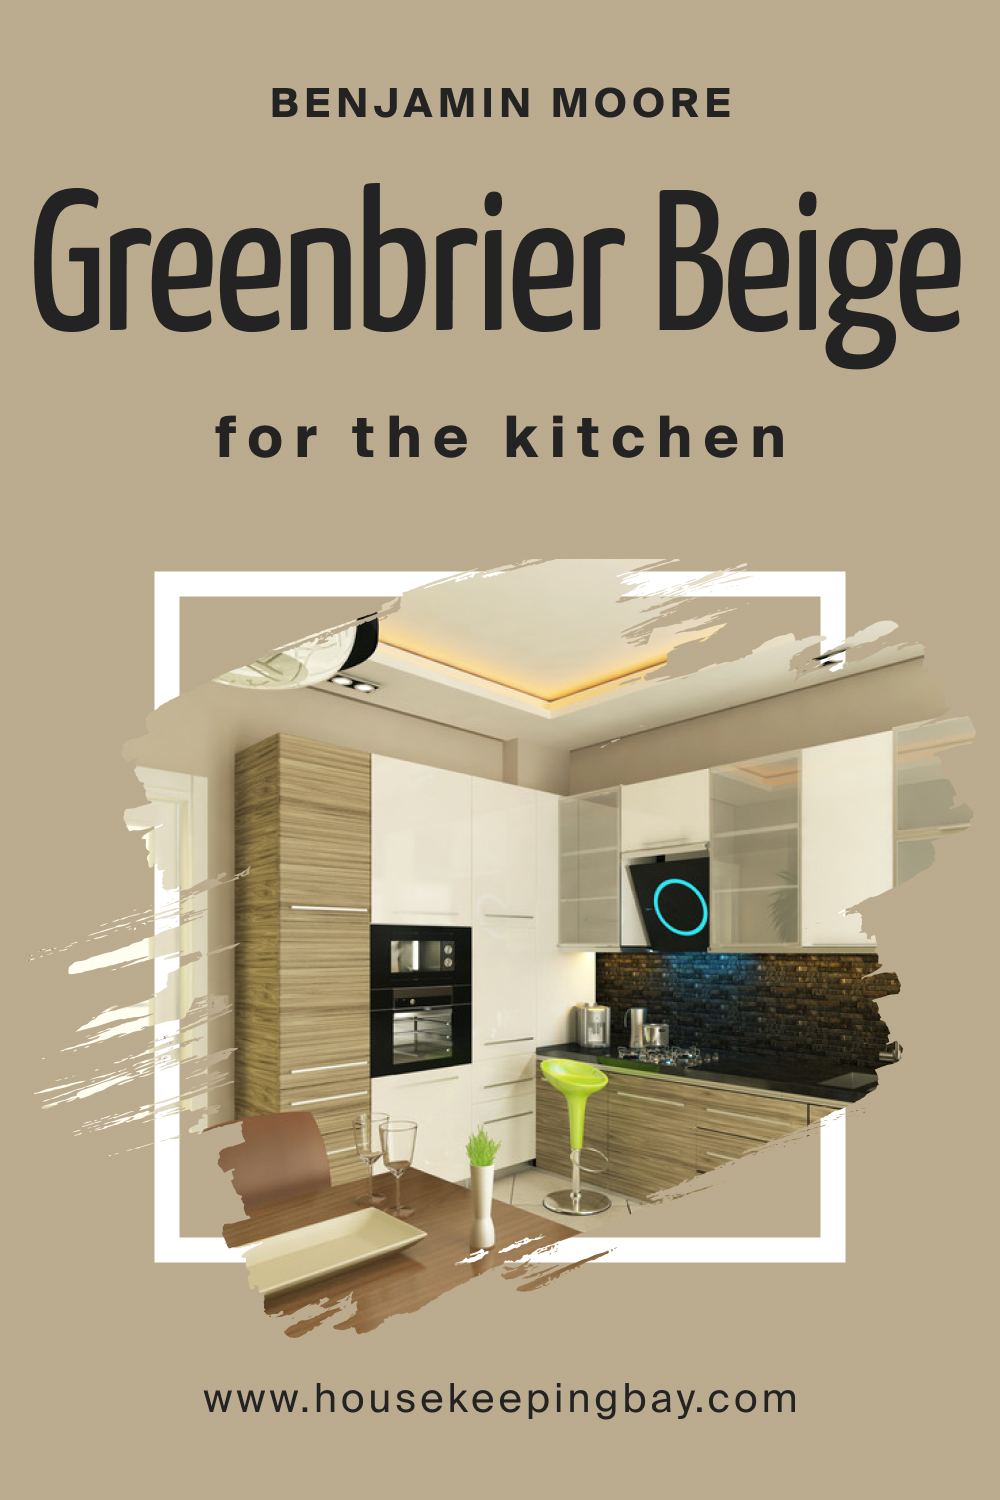 How to Use BM Greenbrier Beige HC-79 in the Kitchen?